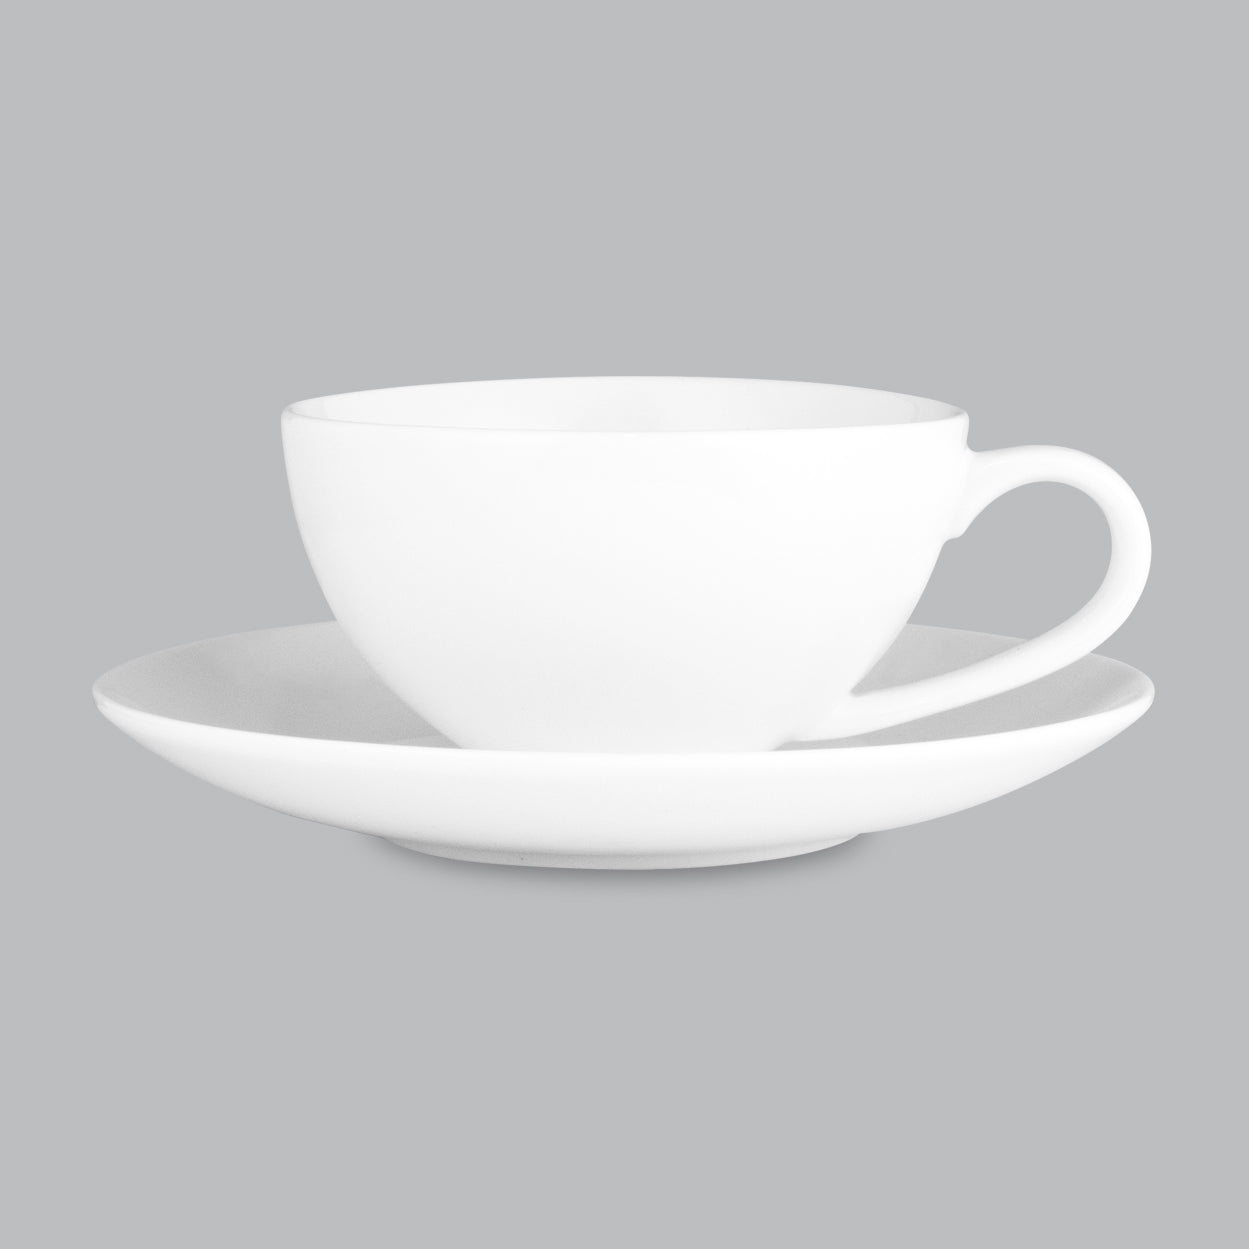 Wilkie Brothers Coupe Cup & Saucer 250ml